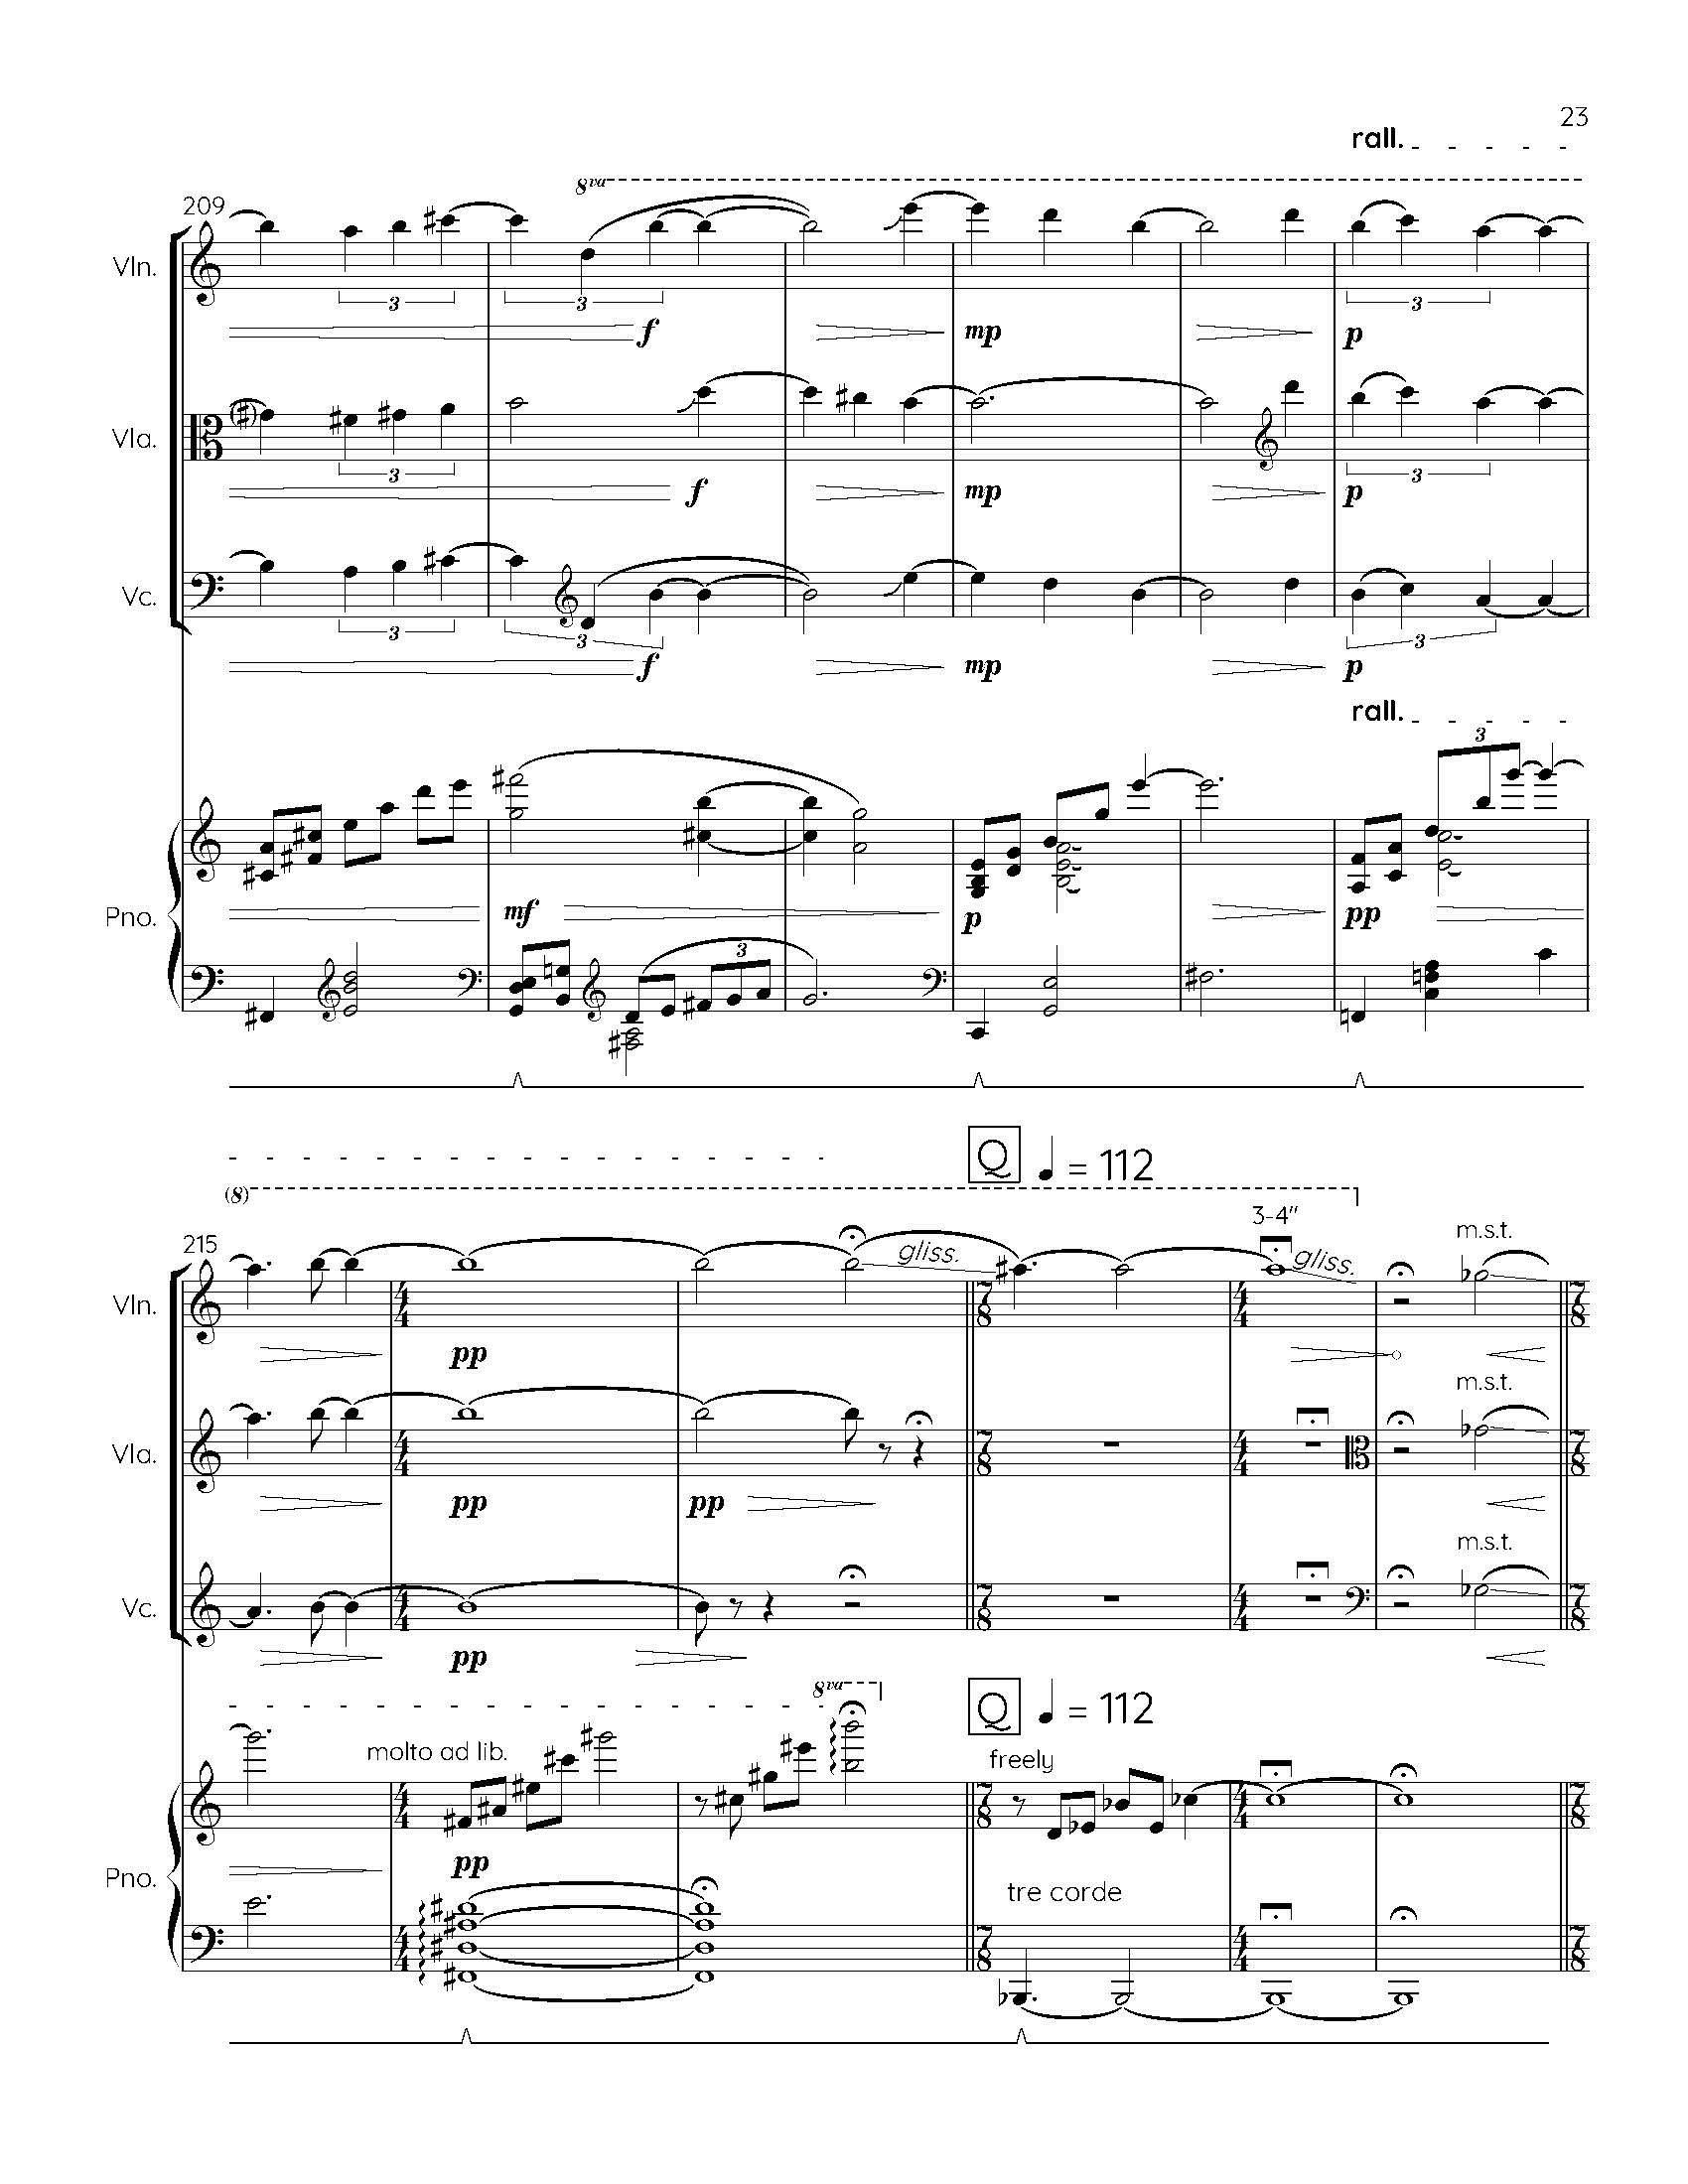 I S L A N D I - Complete Score_Page_29.jpg